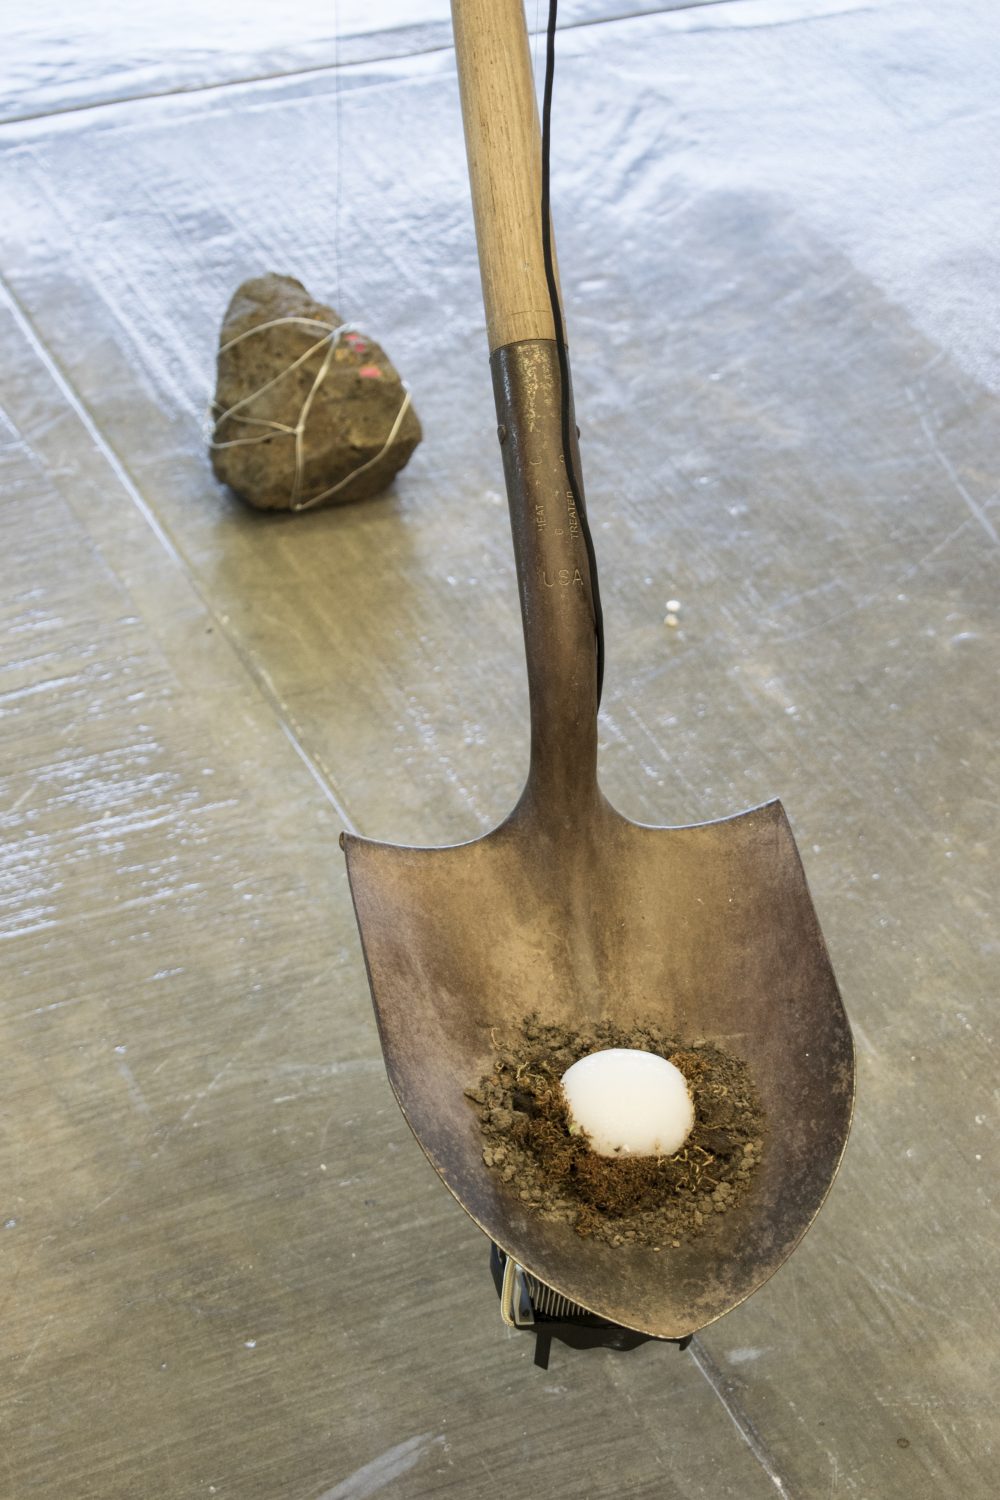 Close up view of shovel with ball of ice surrounded by moss sitting in blade, a large stone sits on floor behind the shovel.